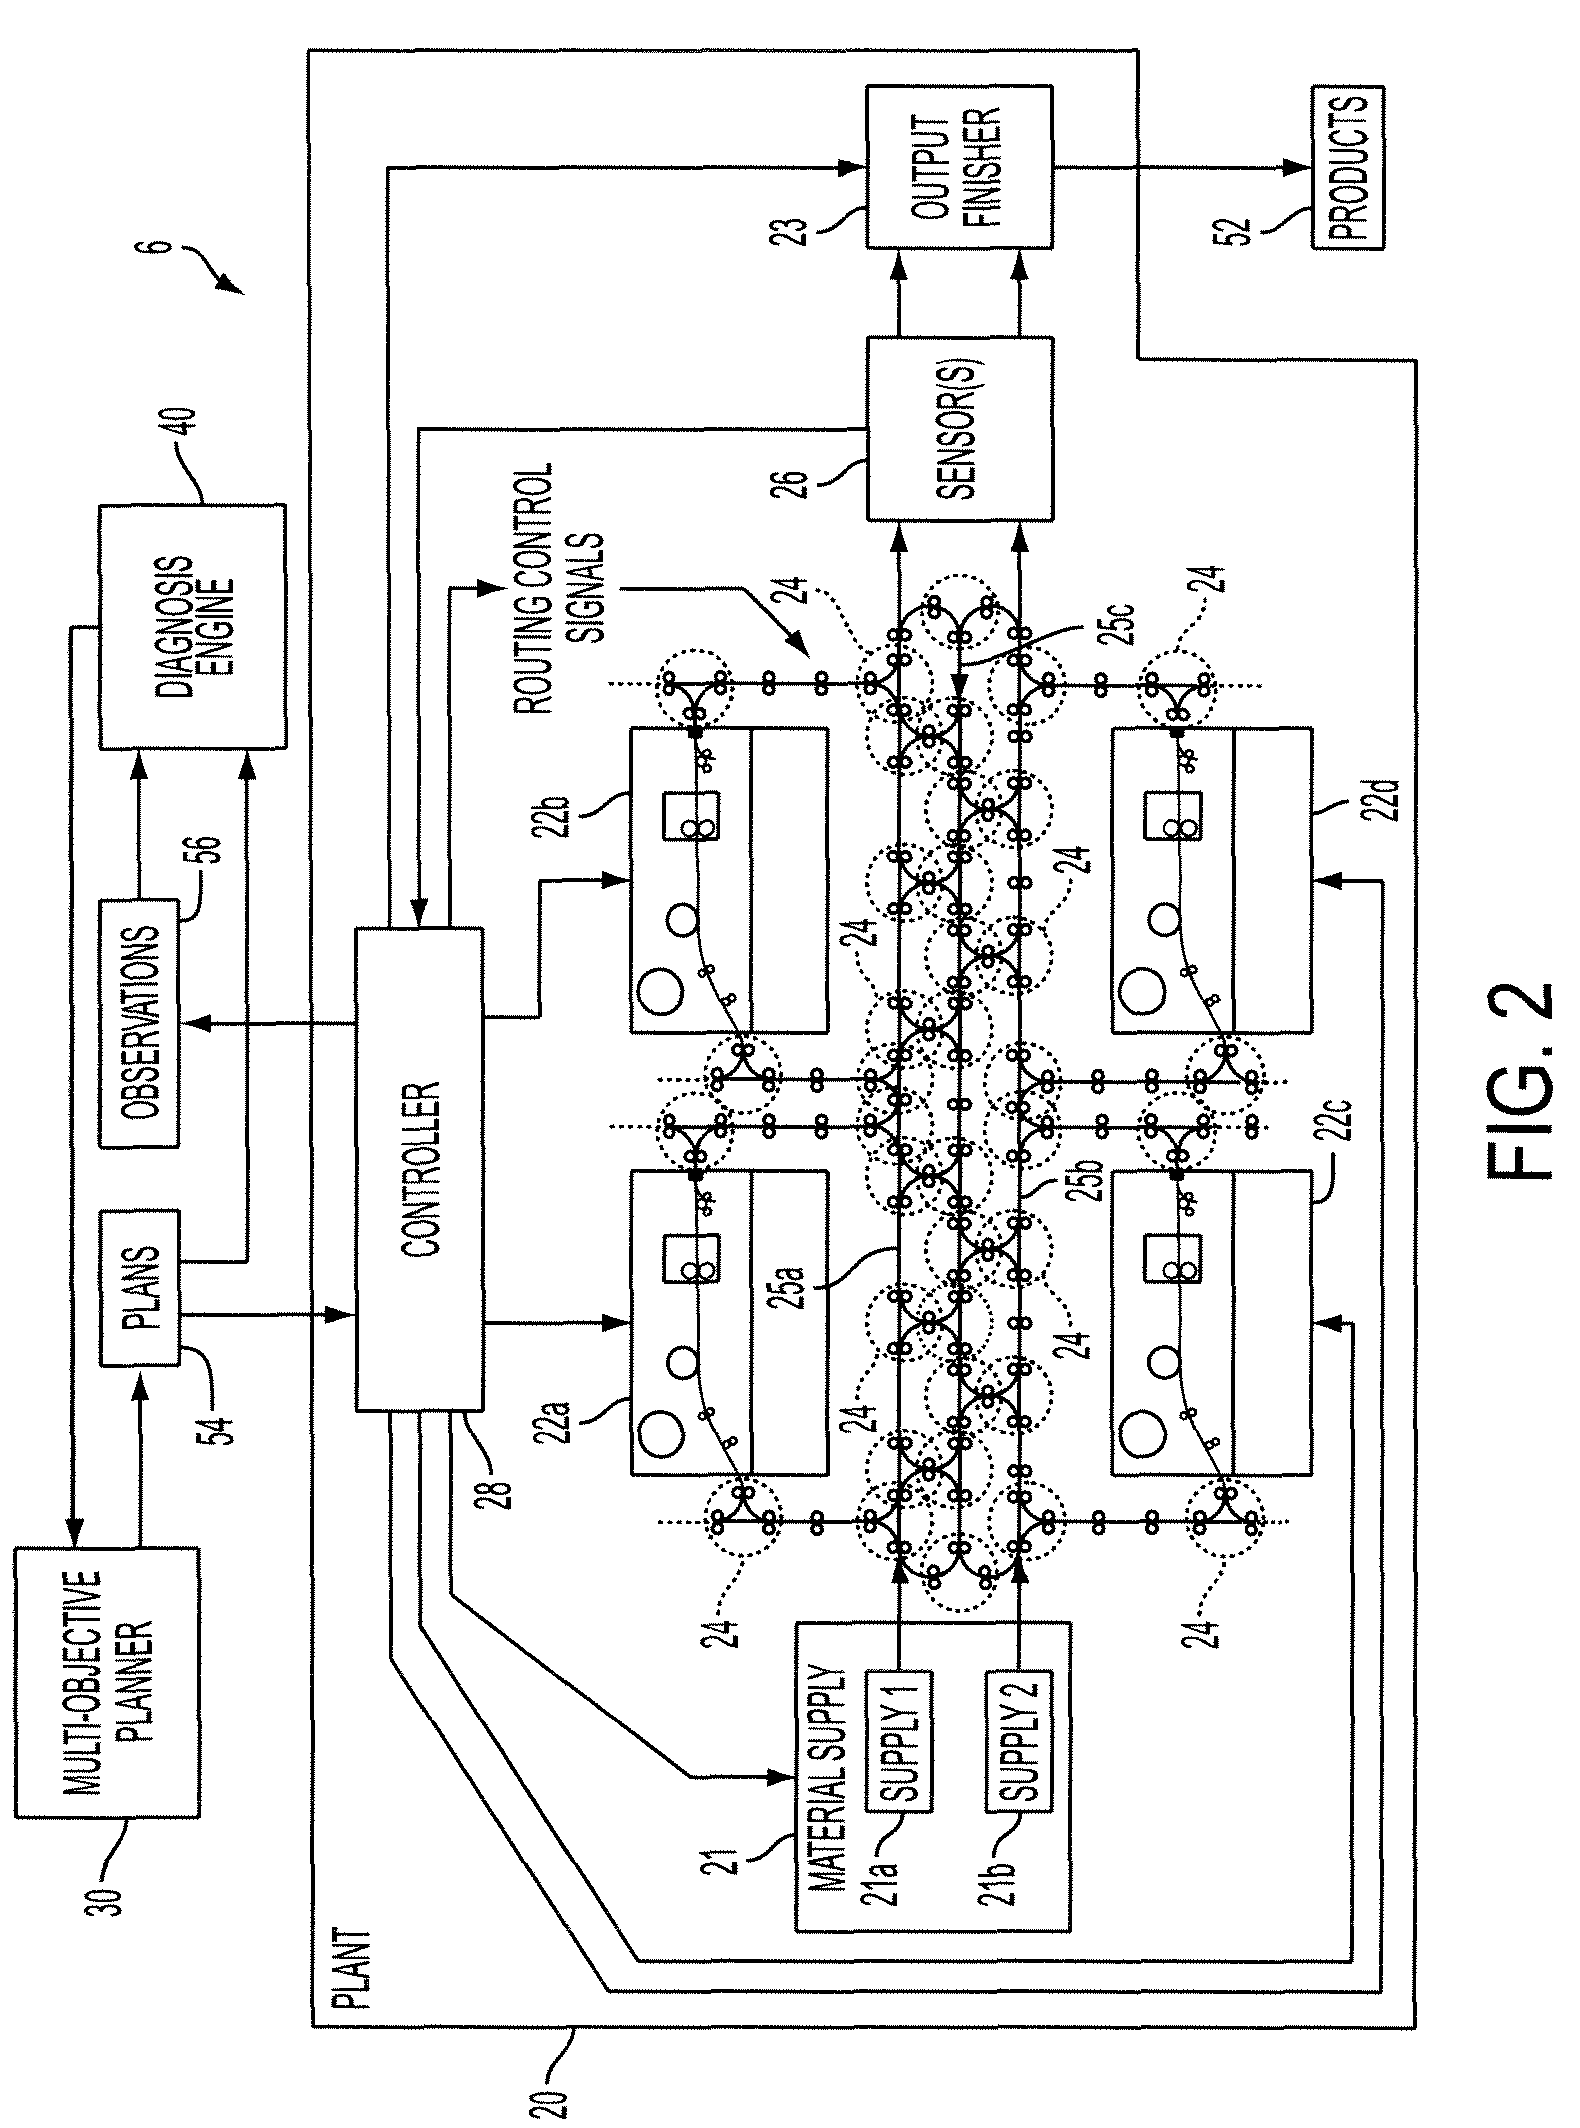 Methods and systems for pervasive diagnostics